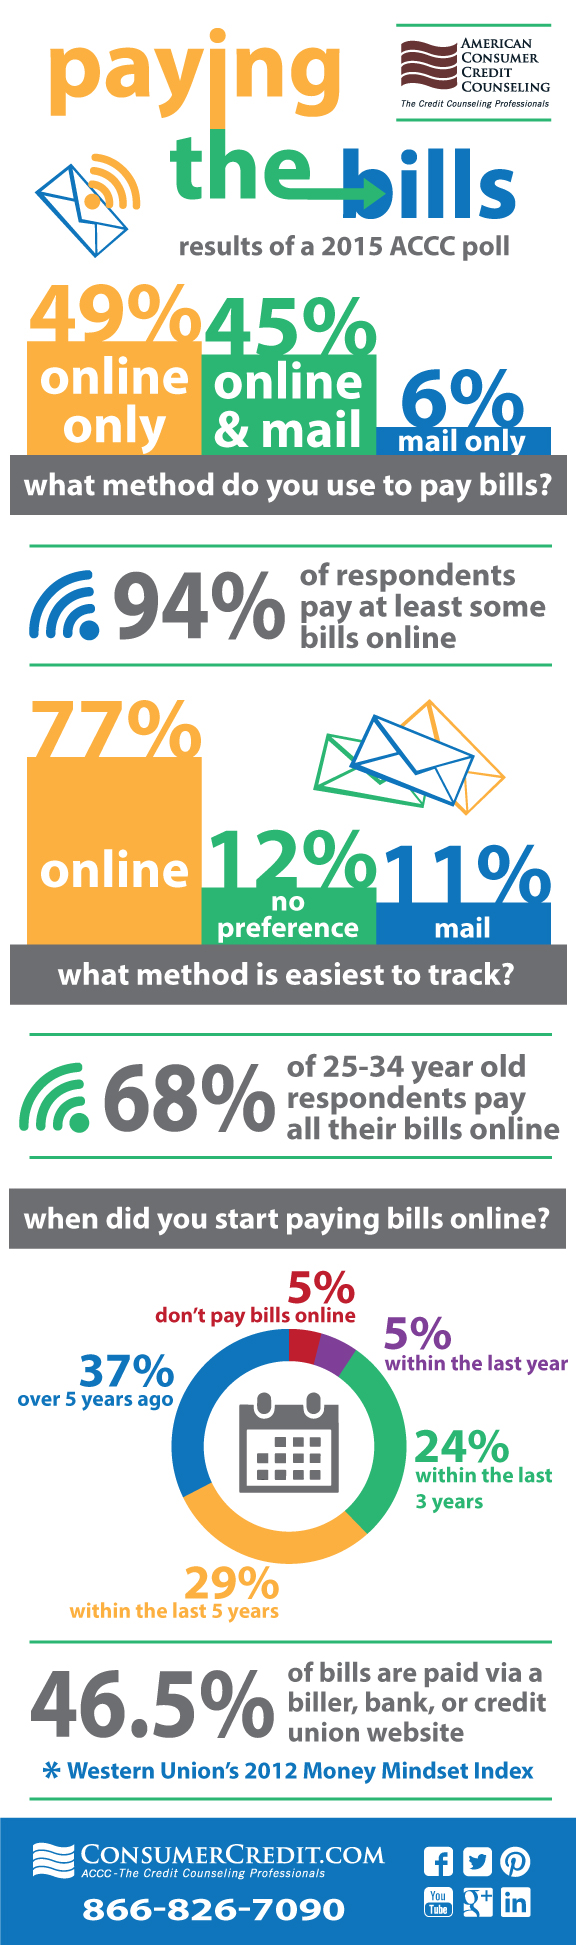 Online Vs Mail: How Do You Pay The Bills?